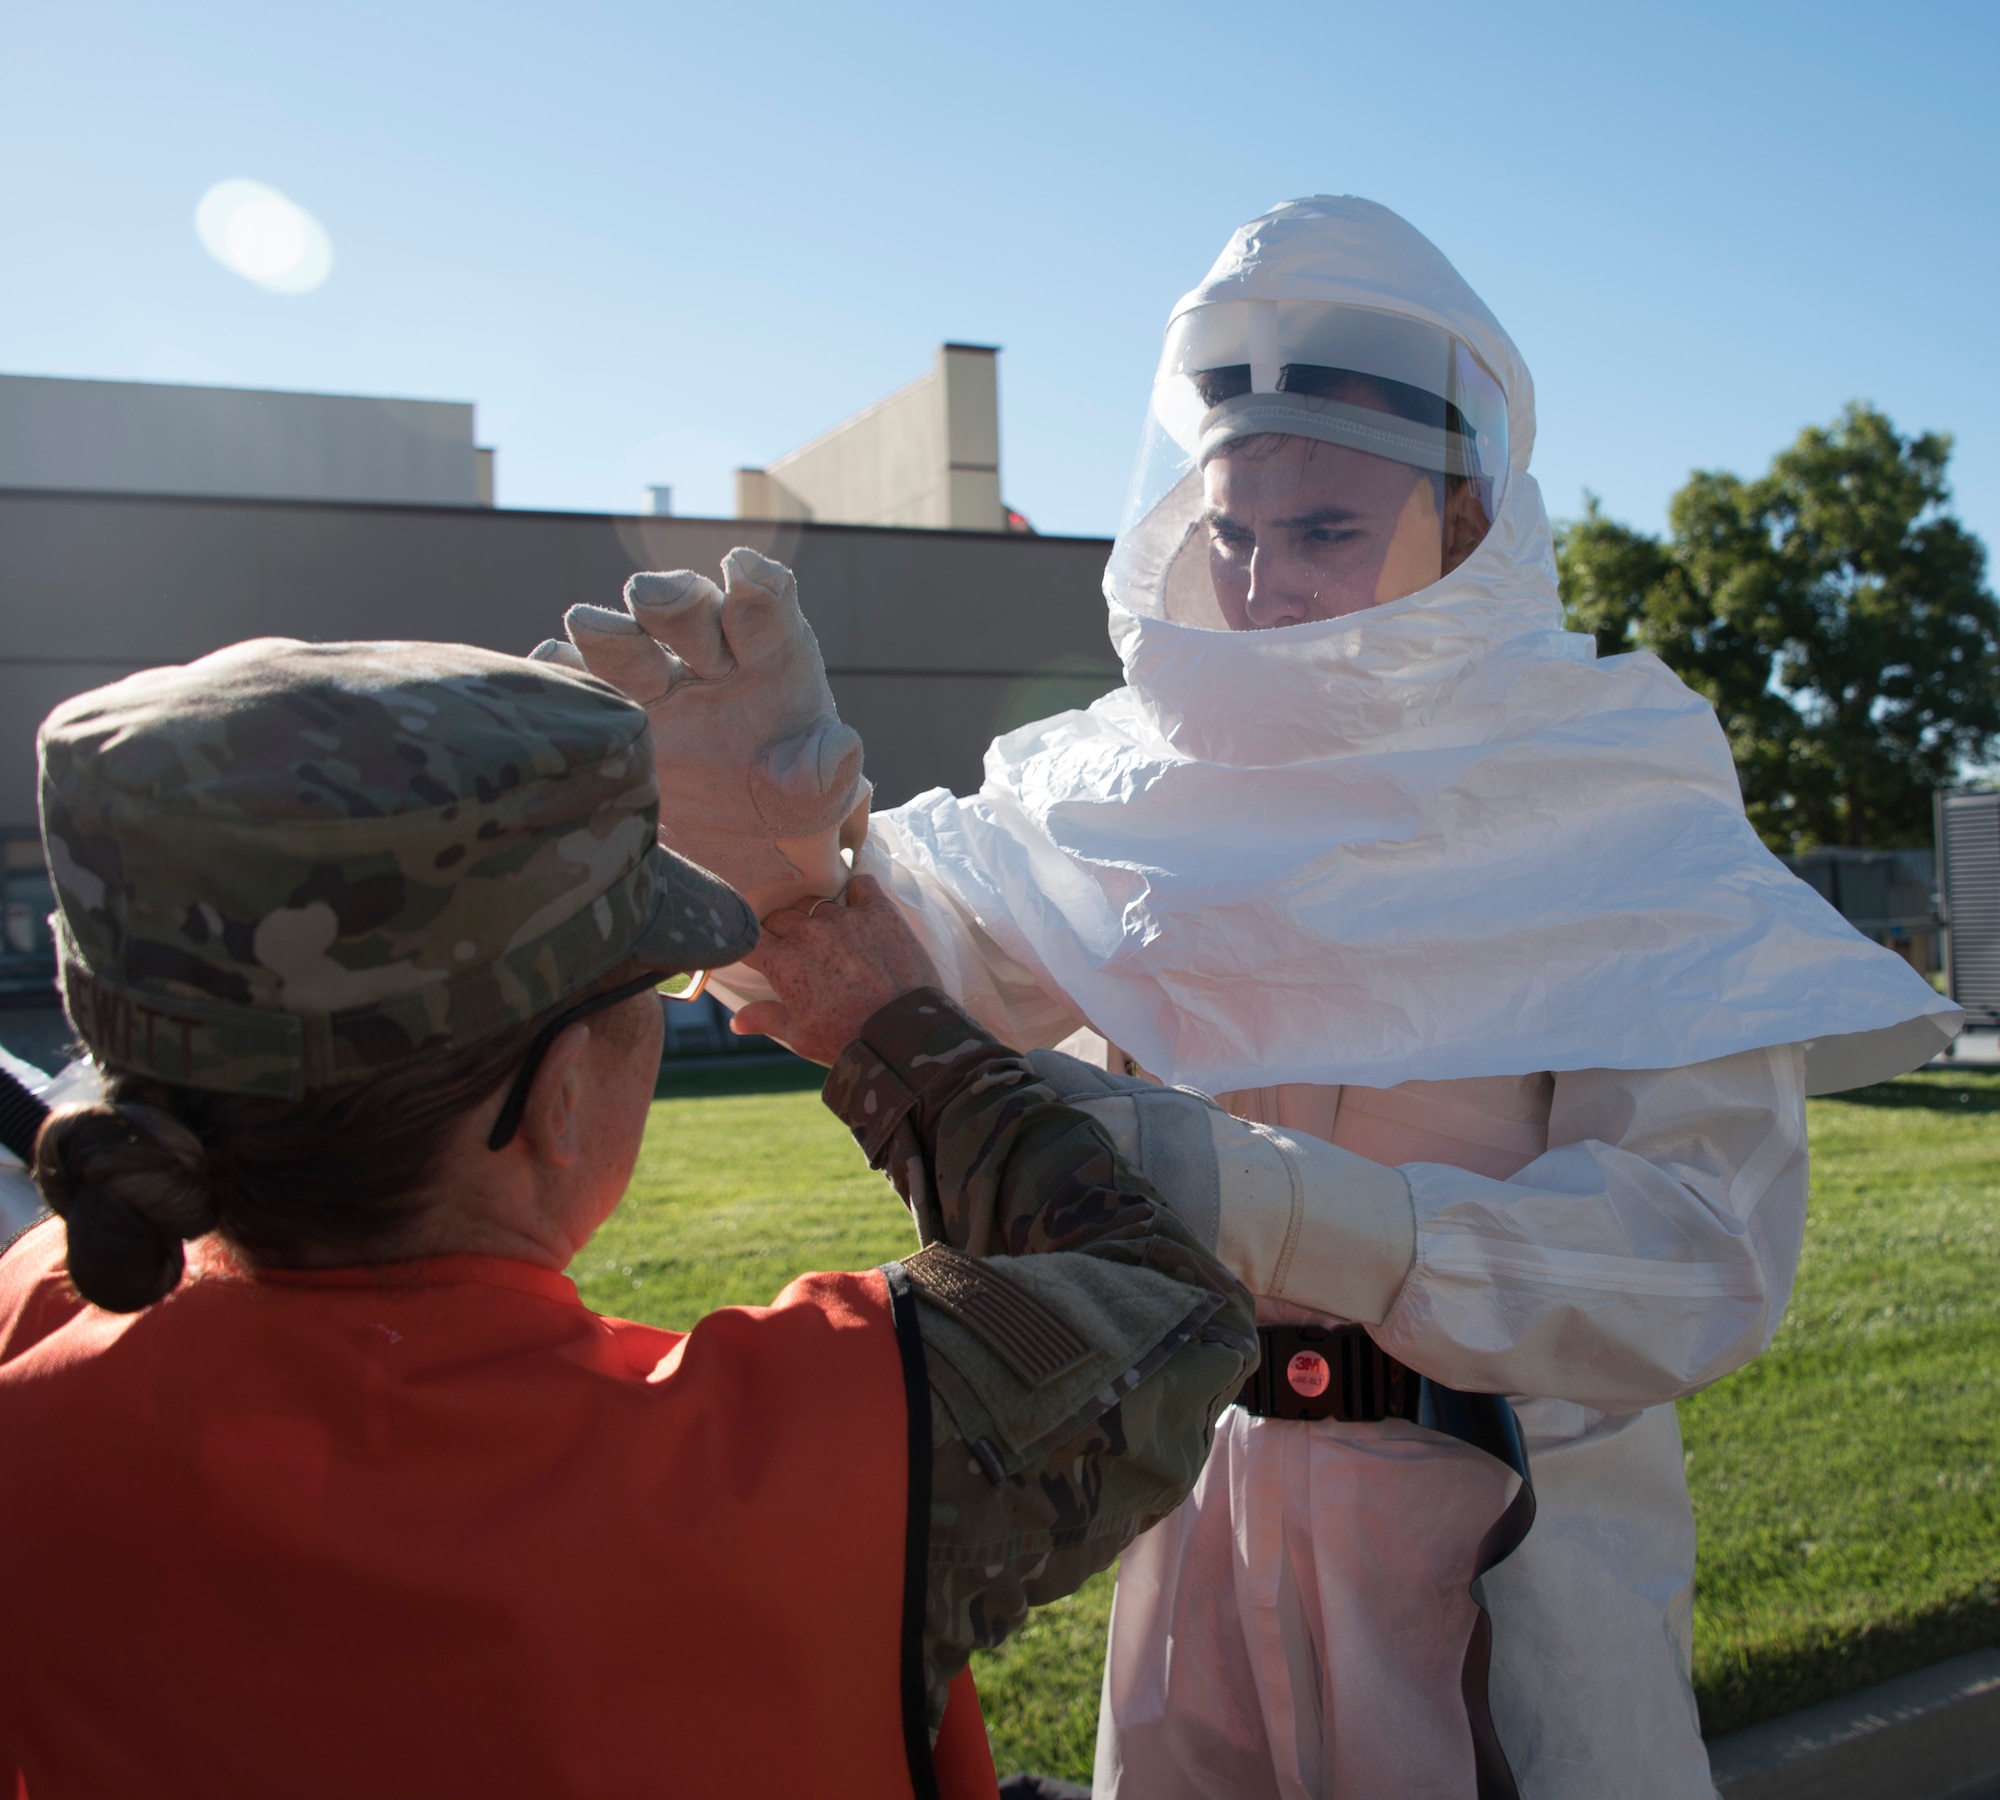 U.S. Air Force Capt. Shannon Hewitt, 60th Medical Operations Squadron, left, assists with a powered air-purifying respirator training suit June 27, 2019, at Travis Air Force Base, California. The suit was part of a hazardous material exercise at David Grant USAF Medical Center. (U.S. Air Force photo by Staff Sgt. Amber Carter)